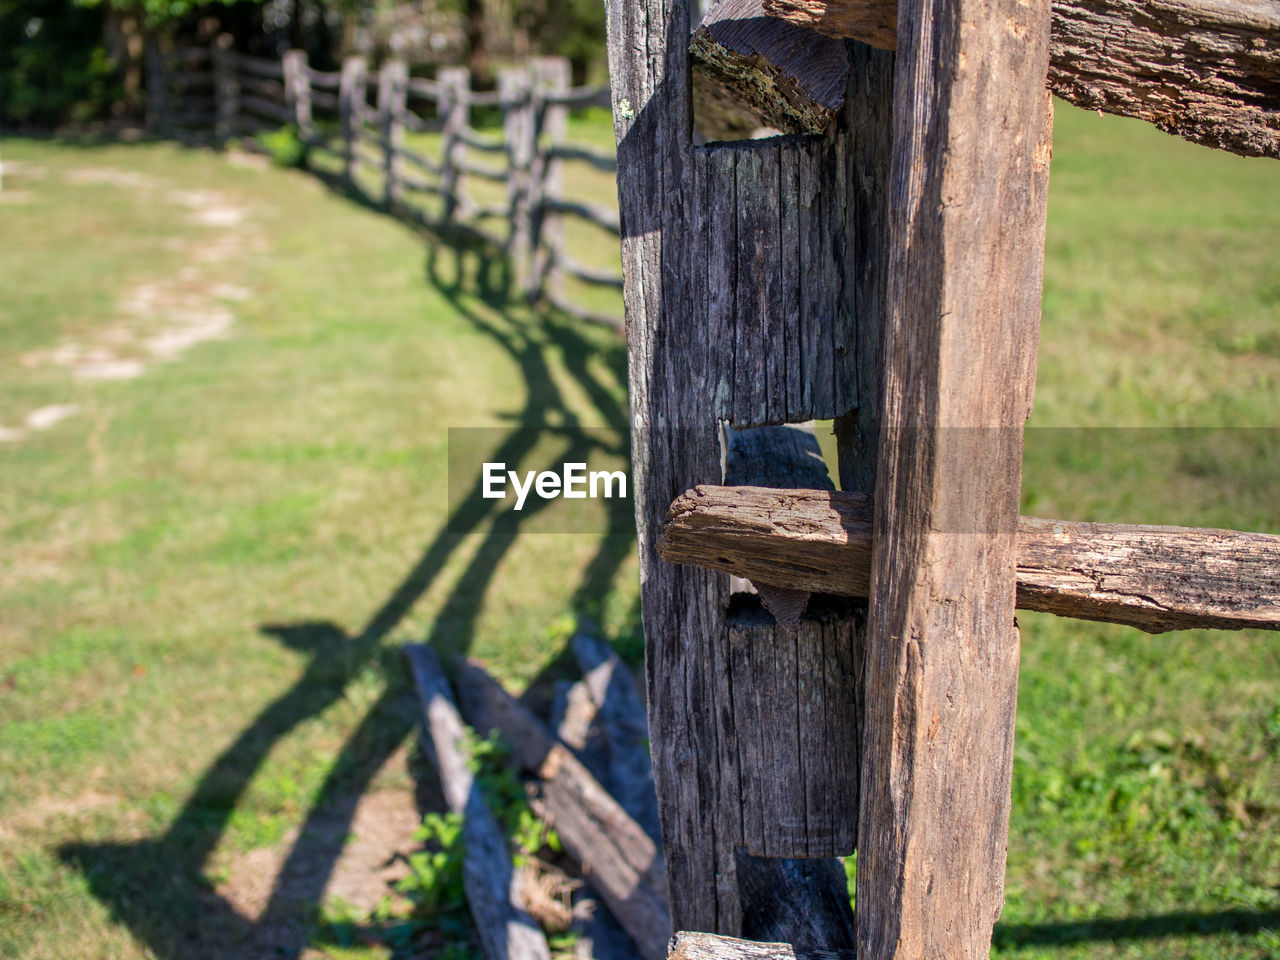 wood, plant, nature, fence, grass, day, no people, green, tree, outdoor structure, sunlight, outdoors, land, landscape, focus on foreground, field, shadow, protection, rural scene, security, wooden post, tree trunk, gate, post, architecture, backyard, agriculture, tranquility, trunk, rural area